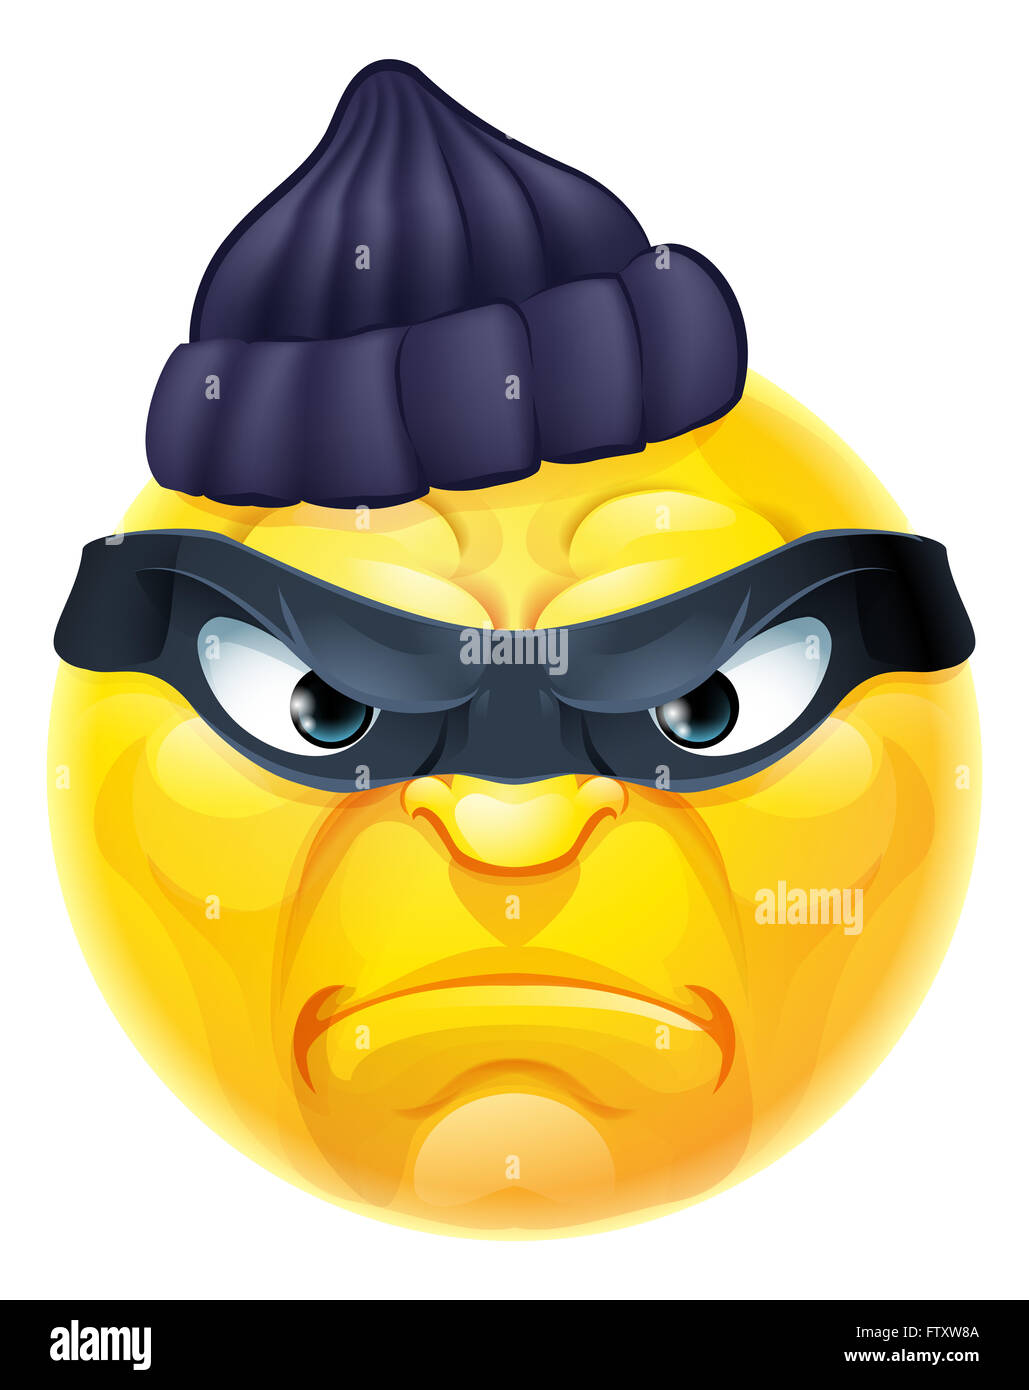 A cartoon emoticon emoji burglar or thief criminal character in mask and beanie hat Stock Photo